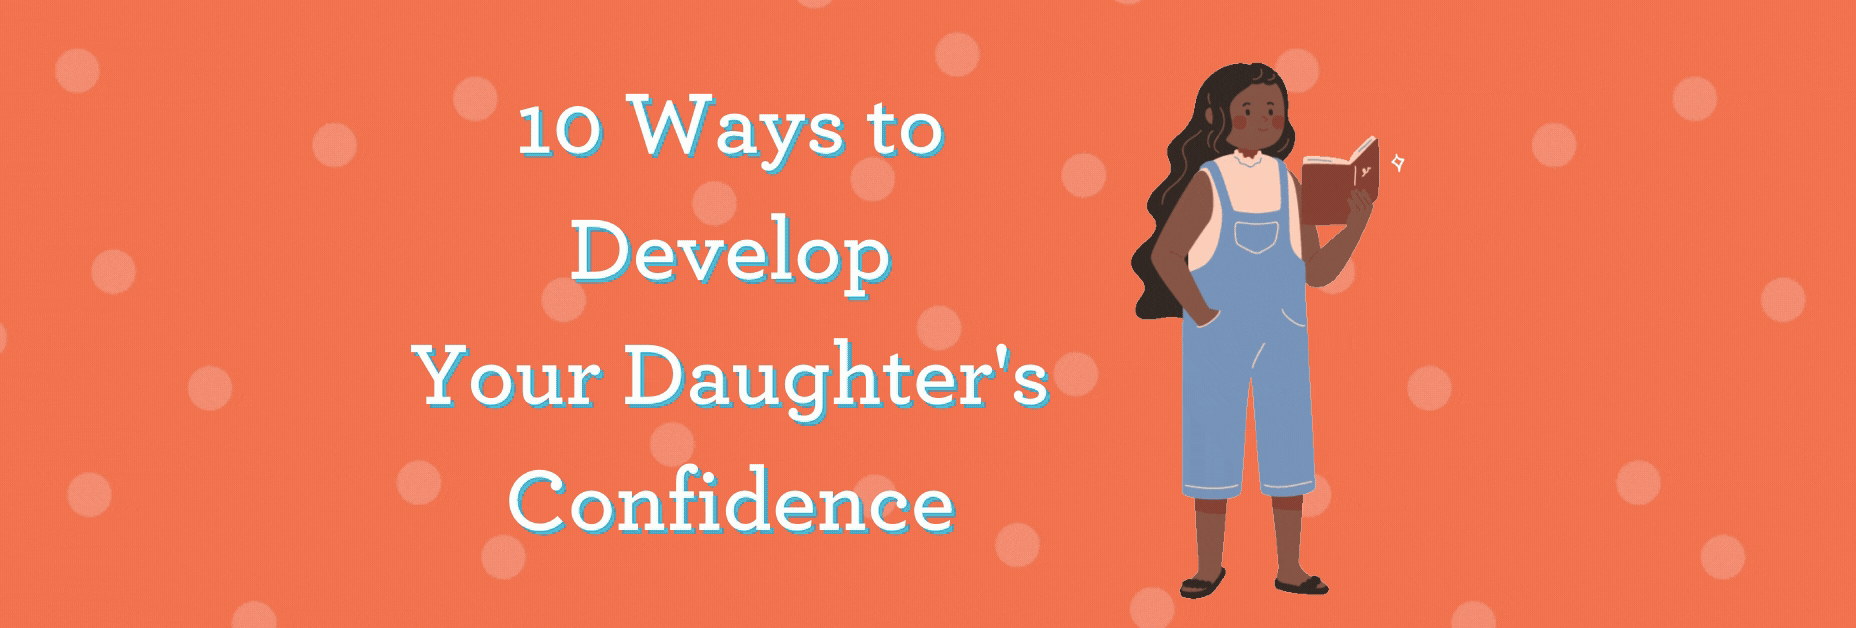 10 Ways to Develop Your Daughter's Confidence